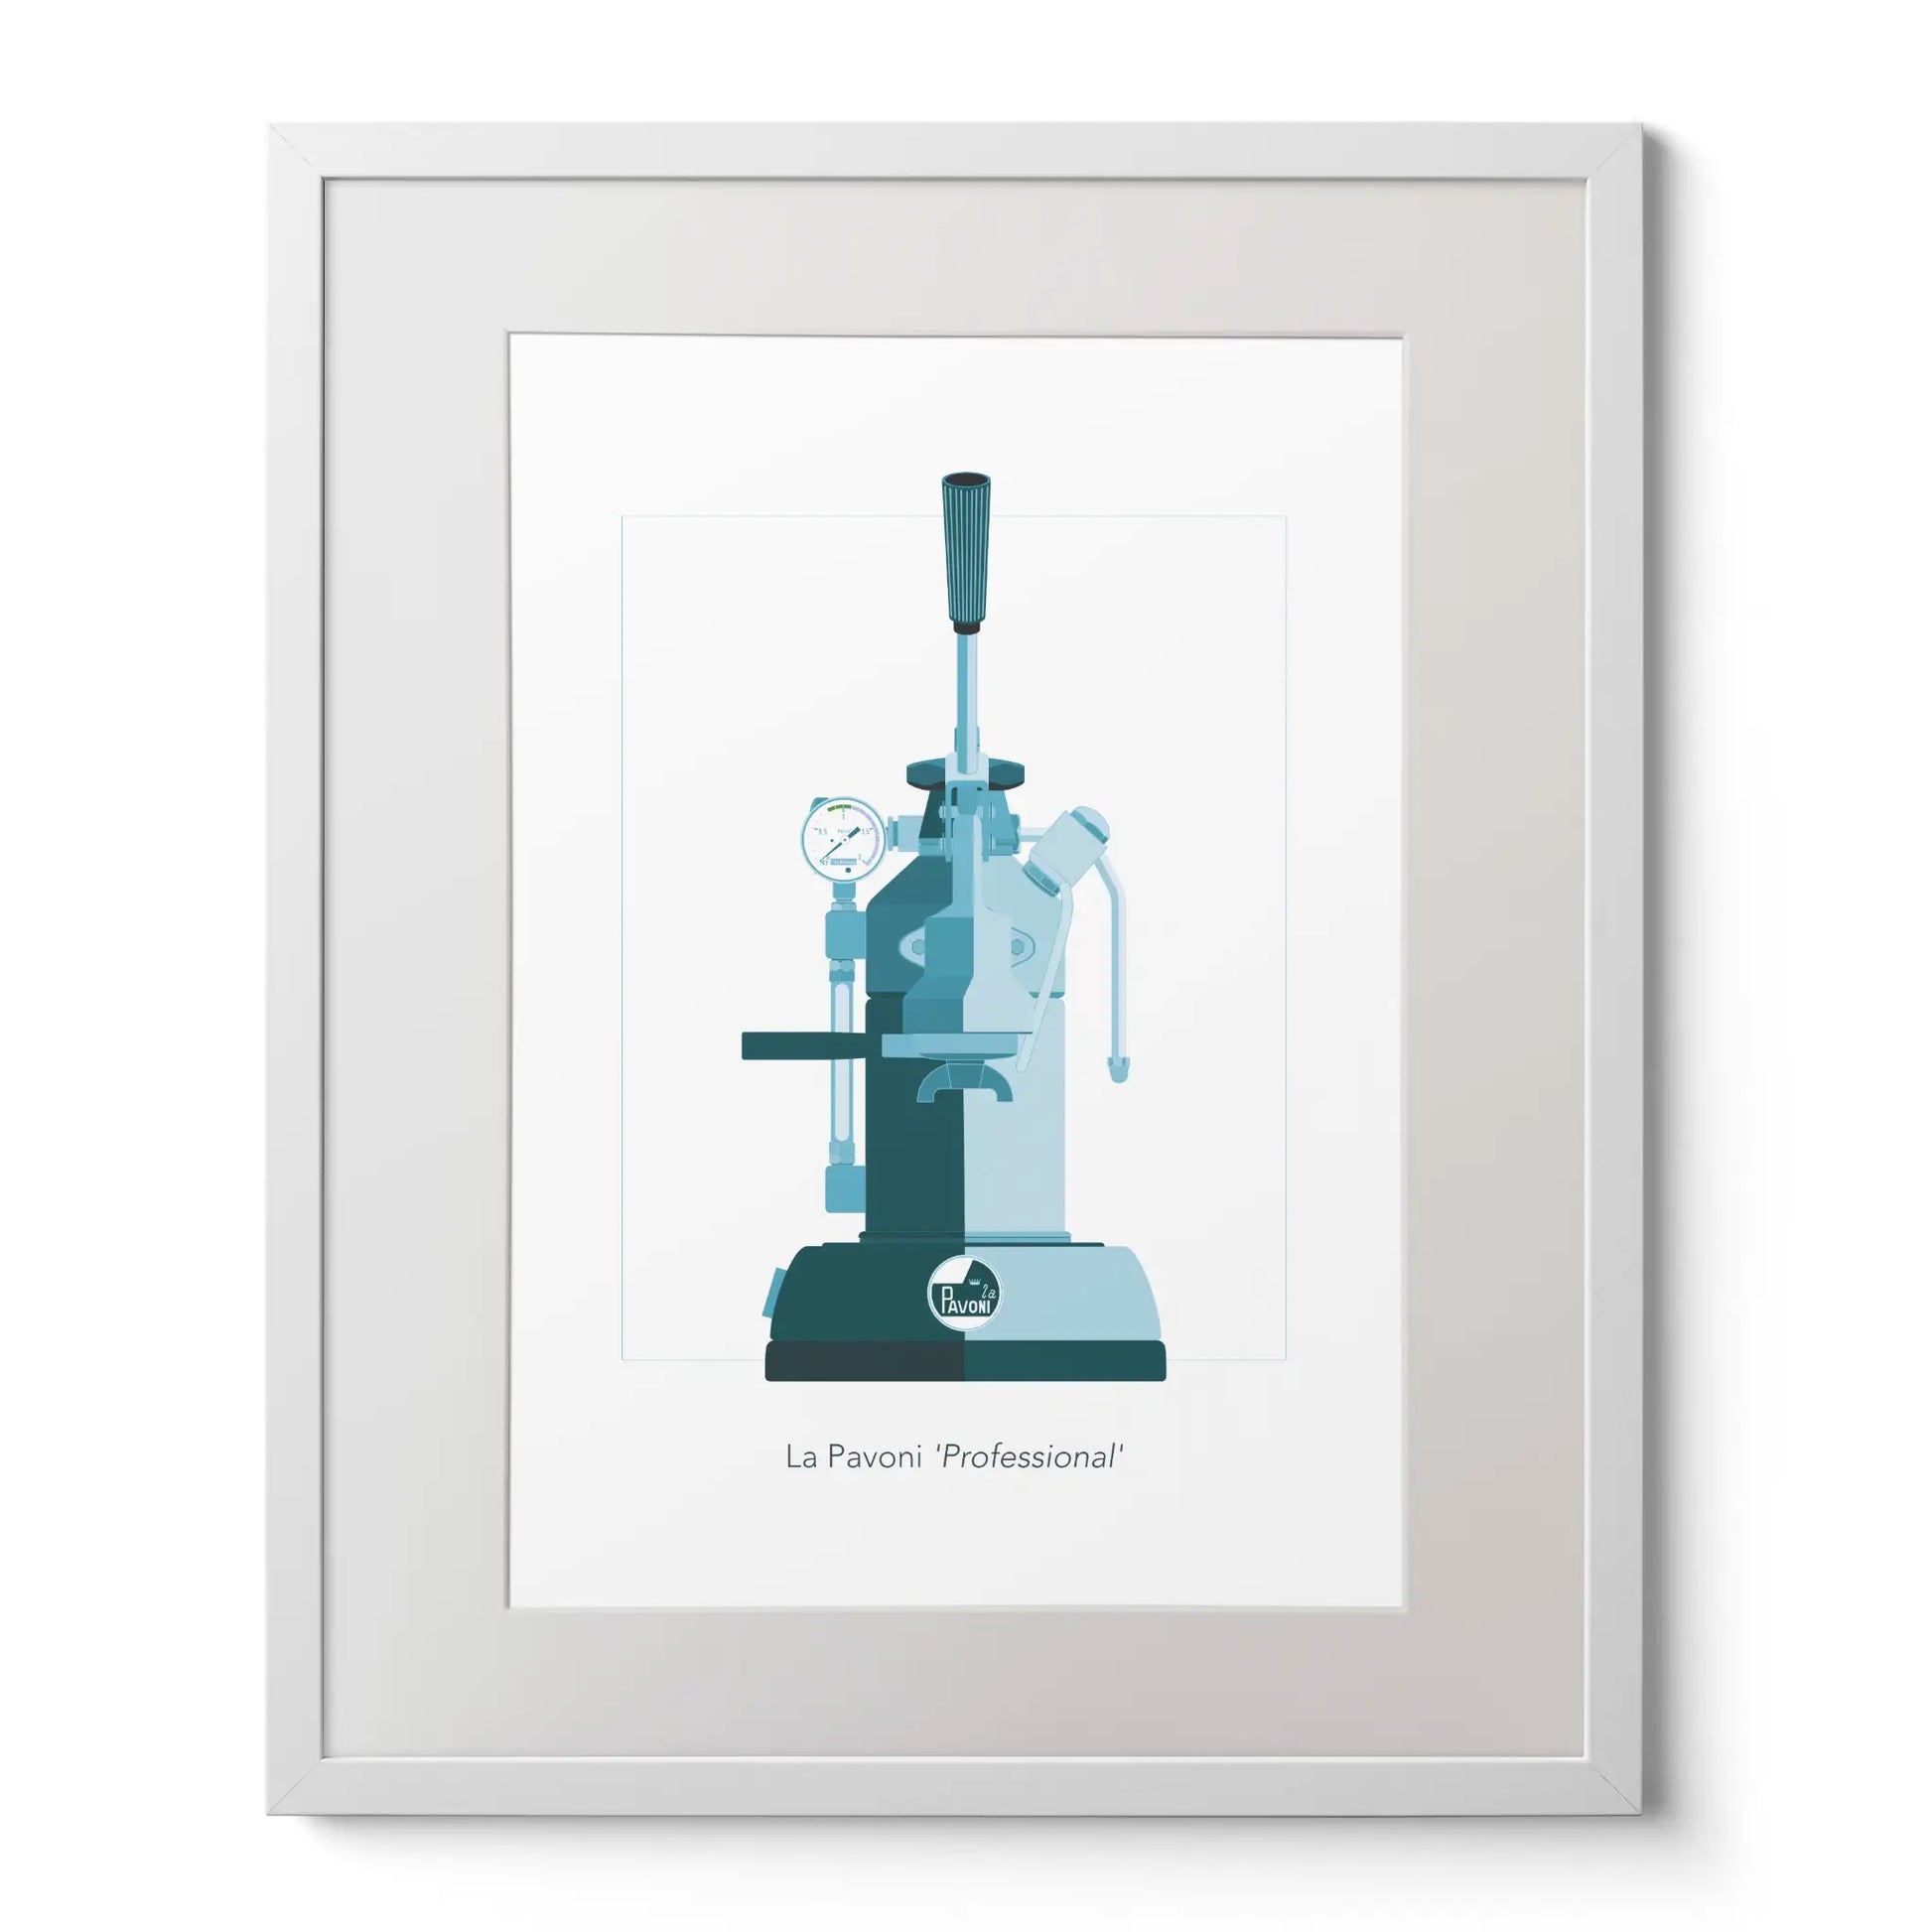 Illustration of a La Pavoni lever coffee machine, front view in aqua blue, framed.